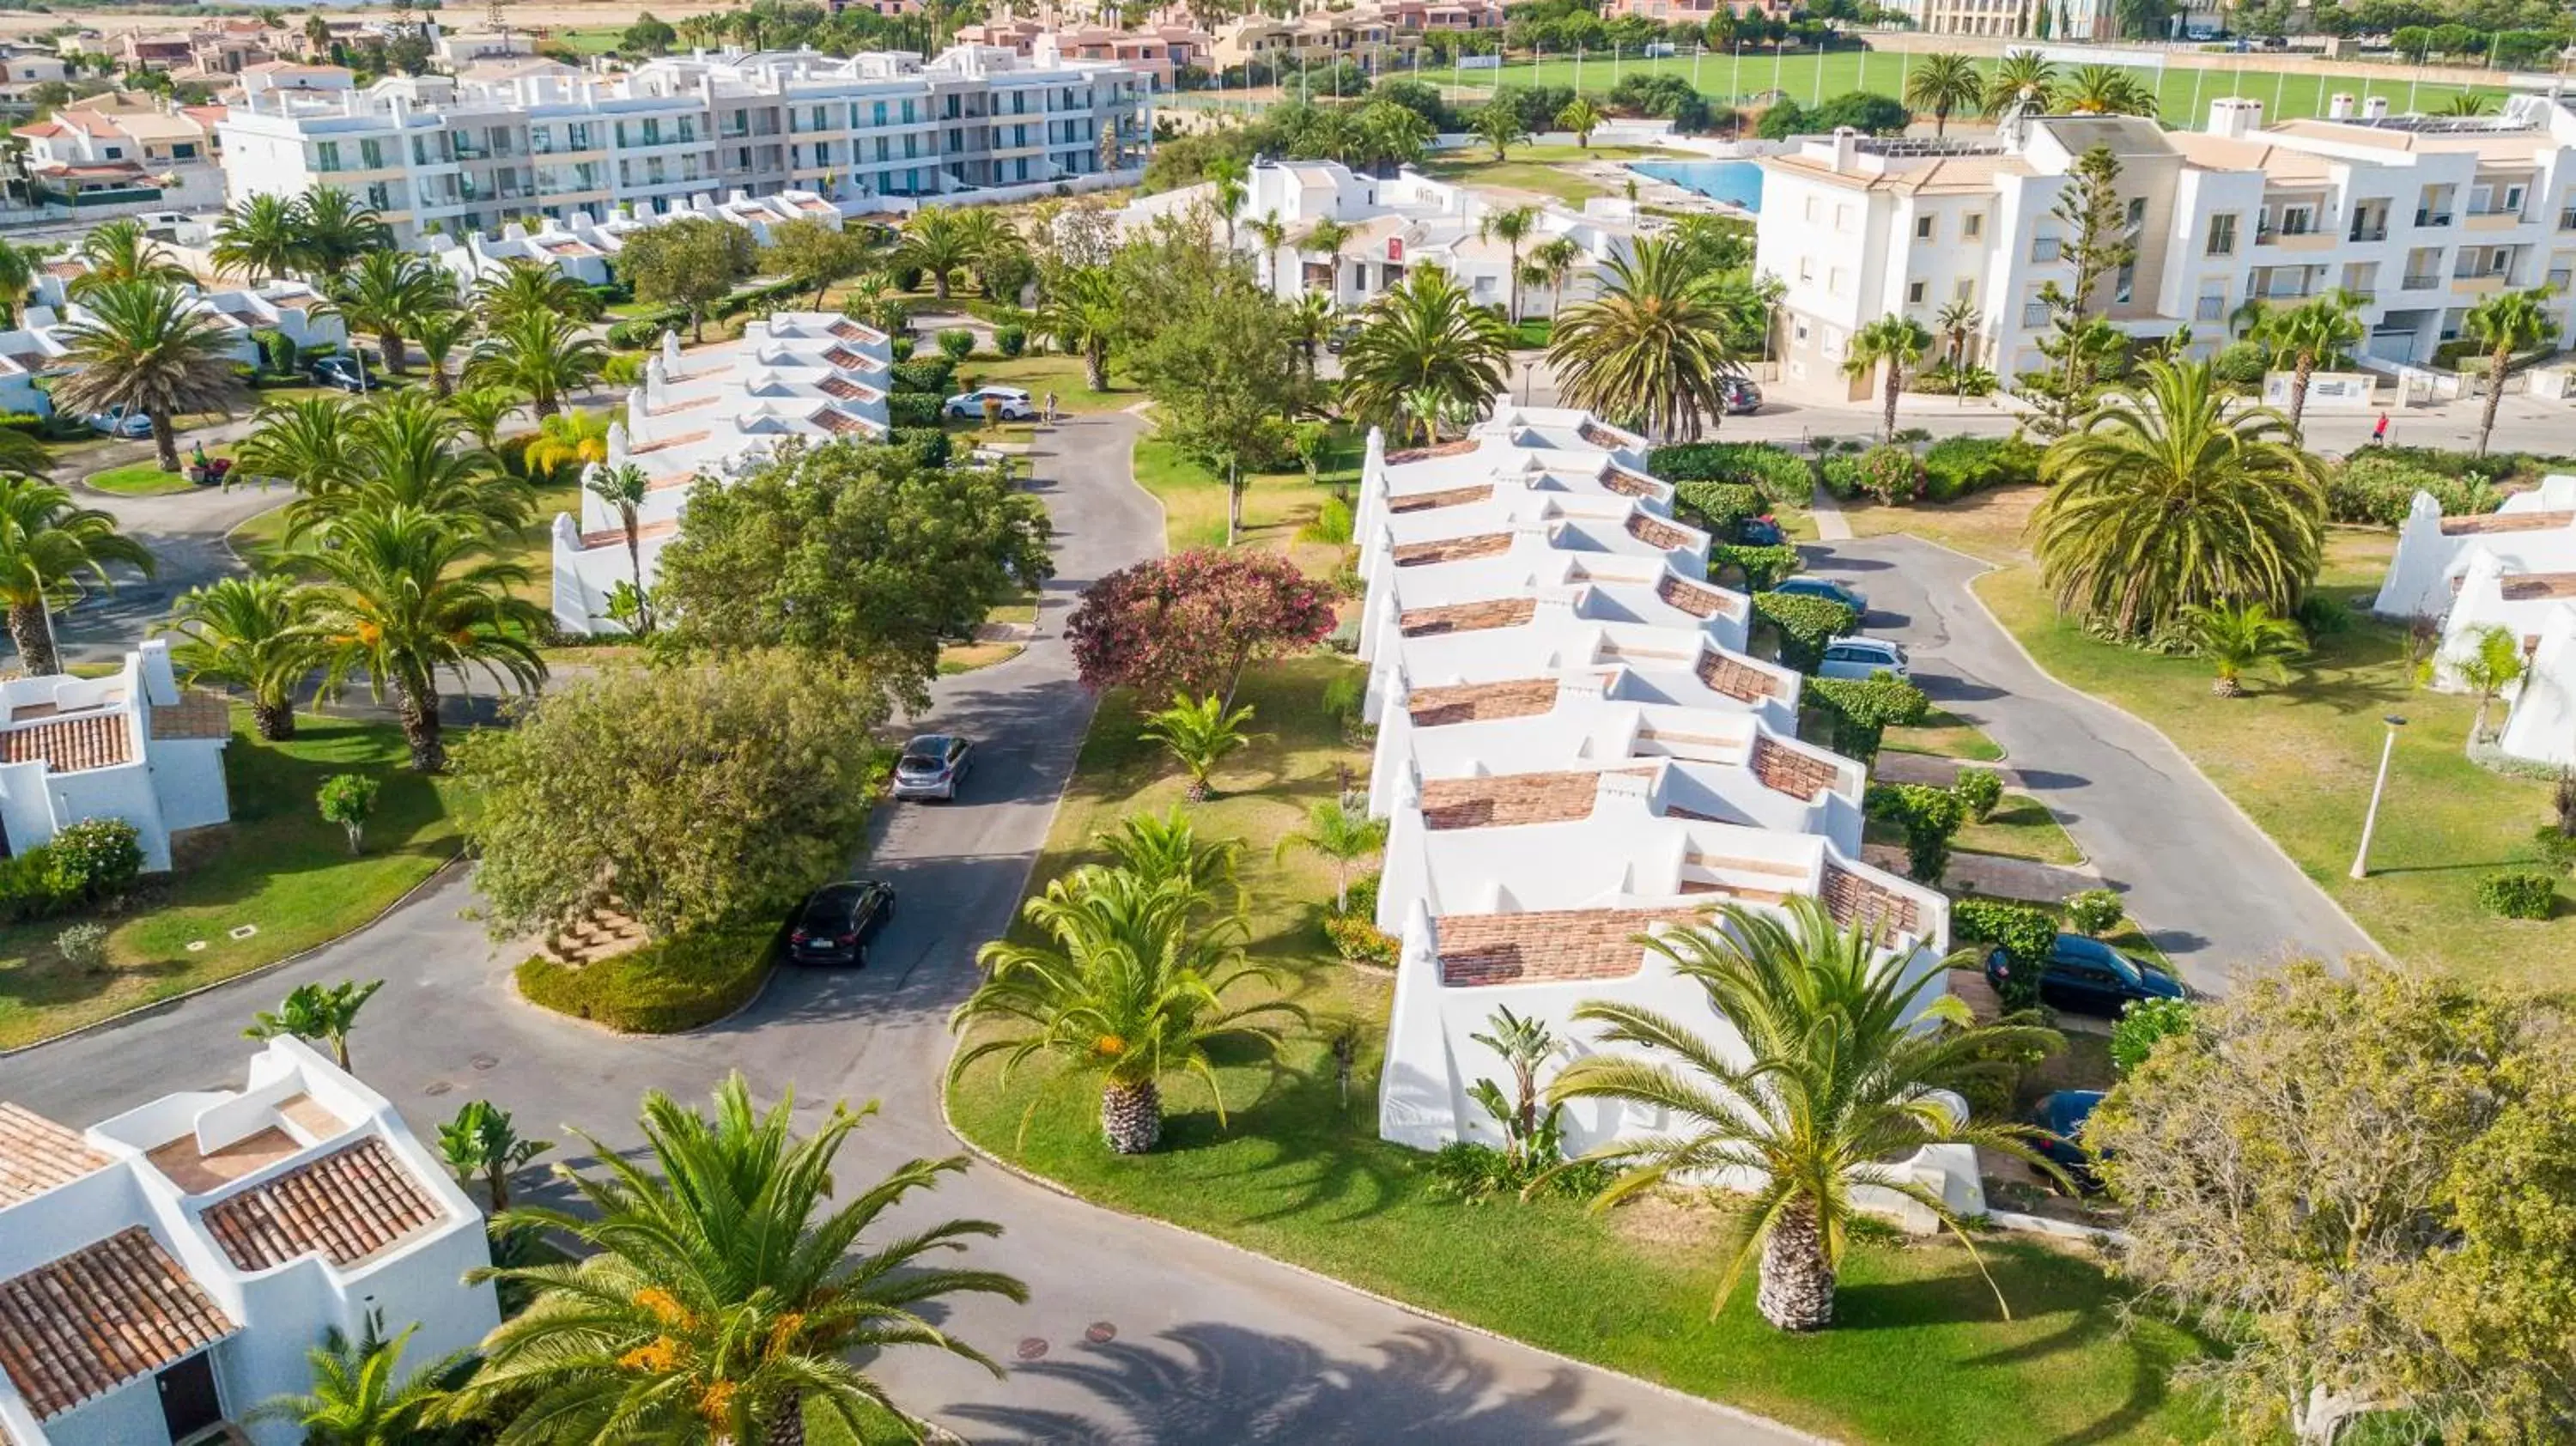 Property building, Bird's-eye View in Ancora Park - Sunplace Hotels & Resorts